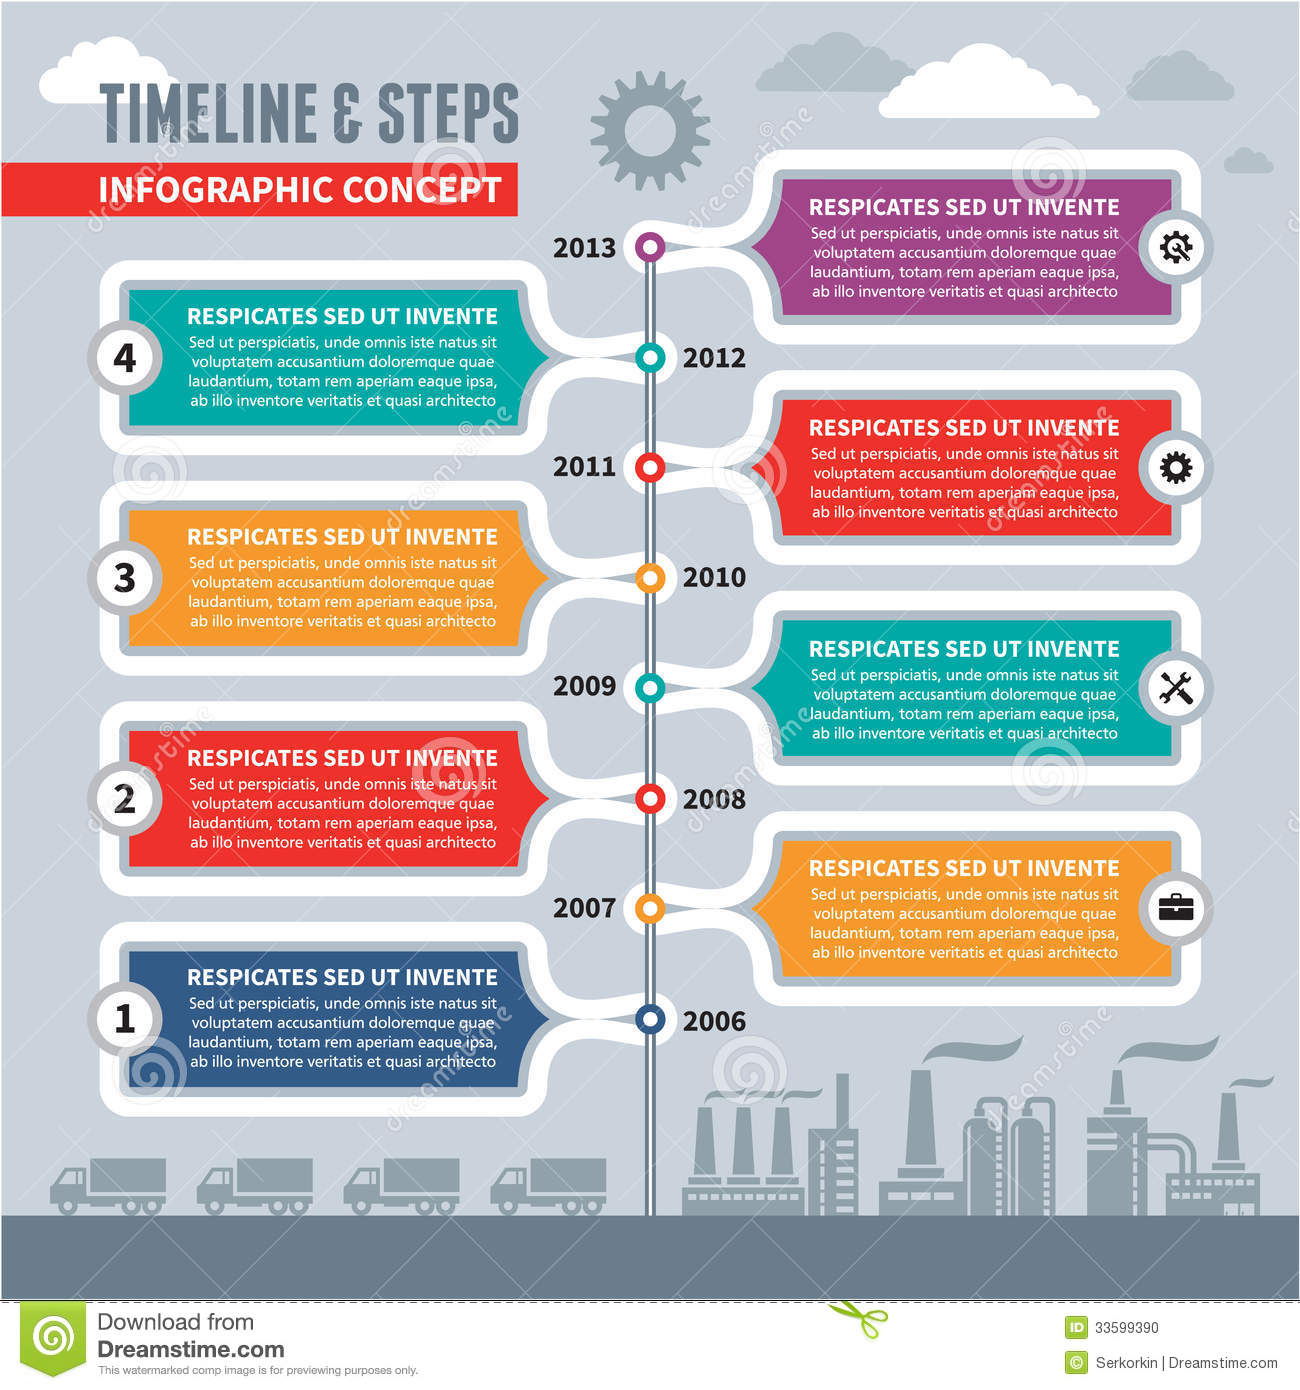 Project Timeline Infographic